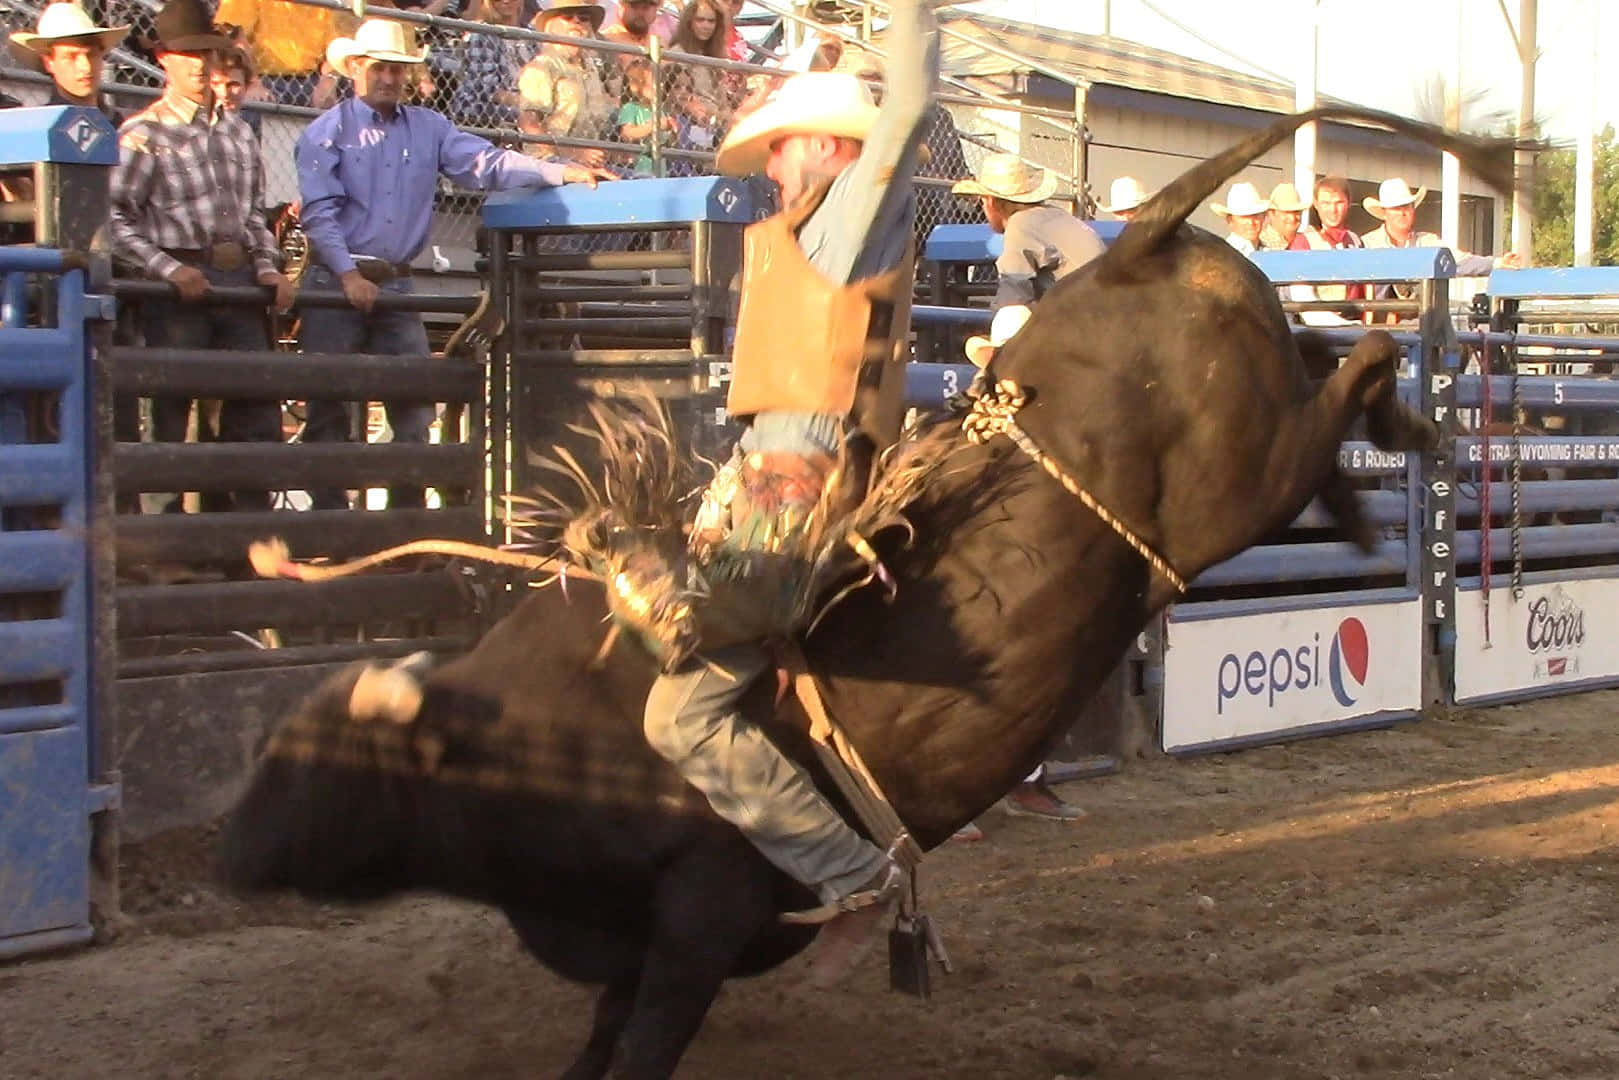 "Cowboys put their guts and gumption on the line when they compete at Bull Riding"